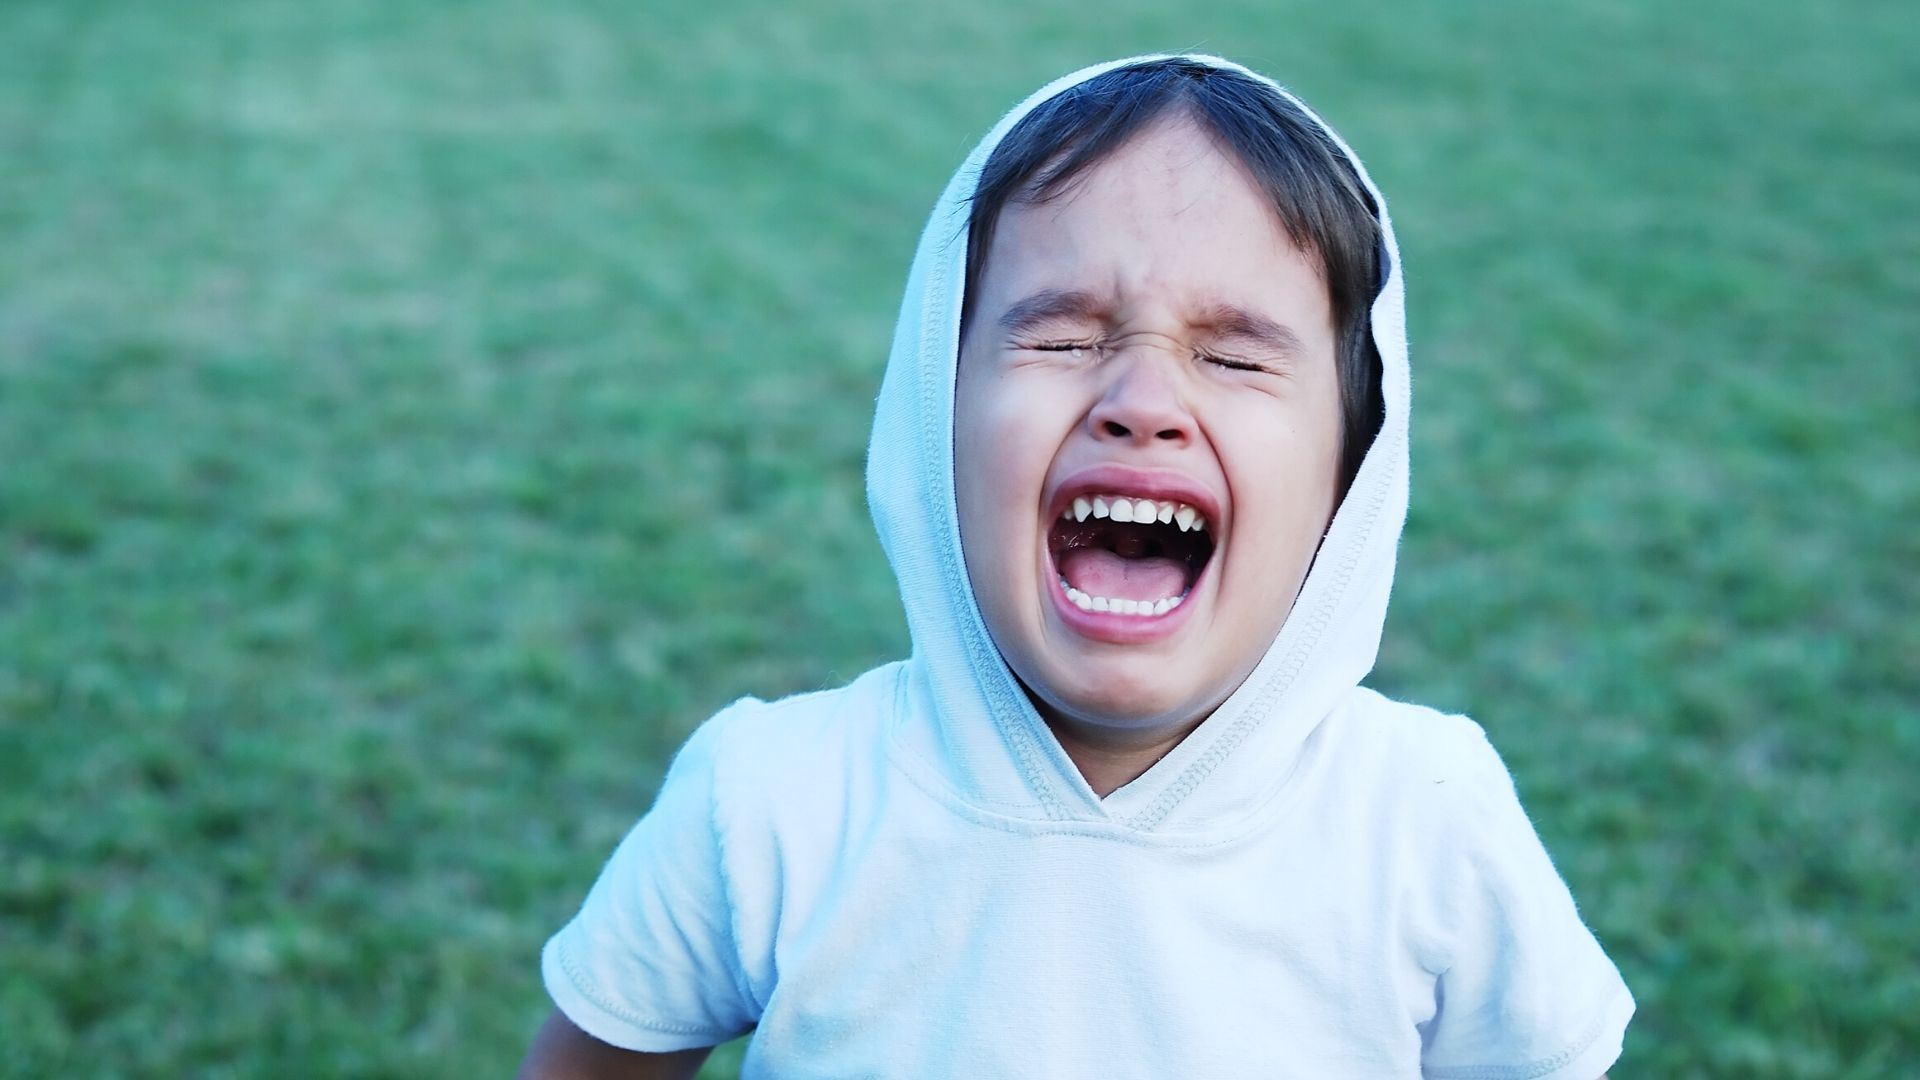 Understanding your kid’s big emotions (anger, crying, etc.)